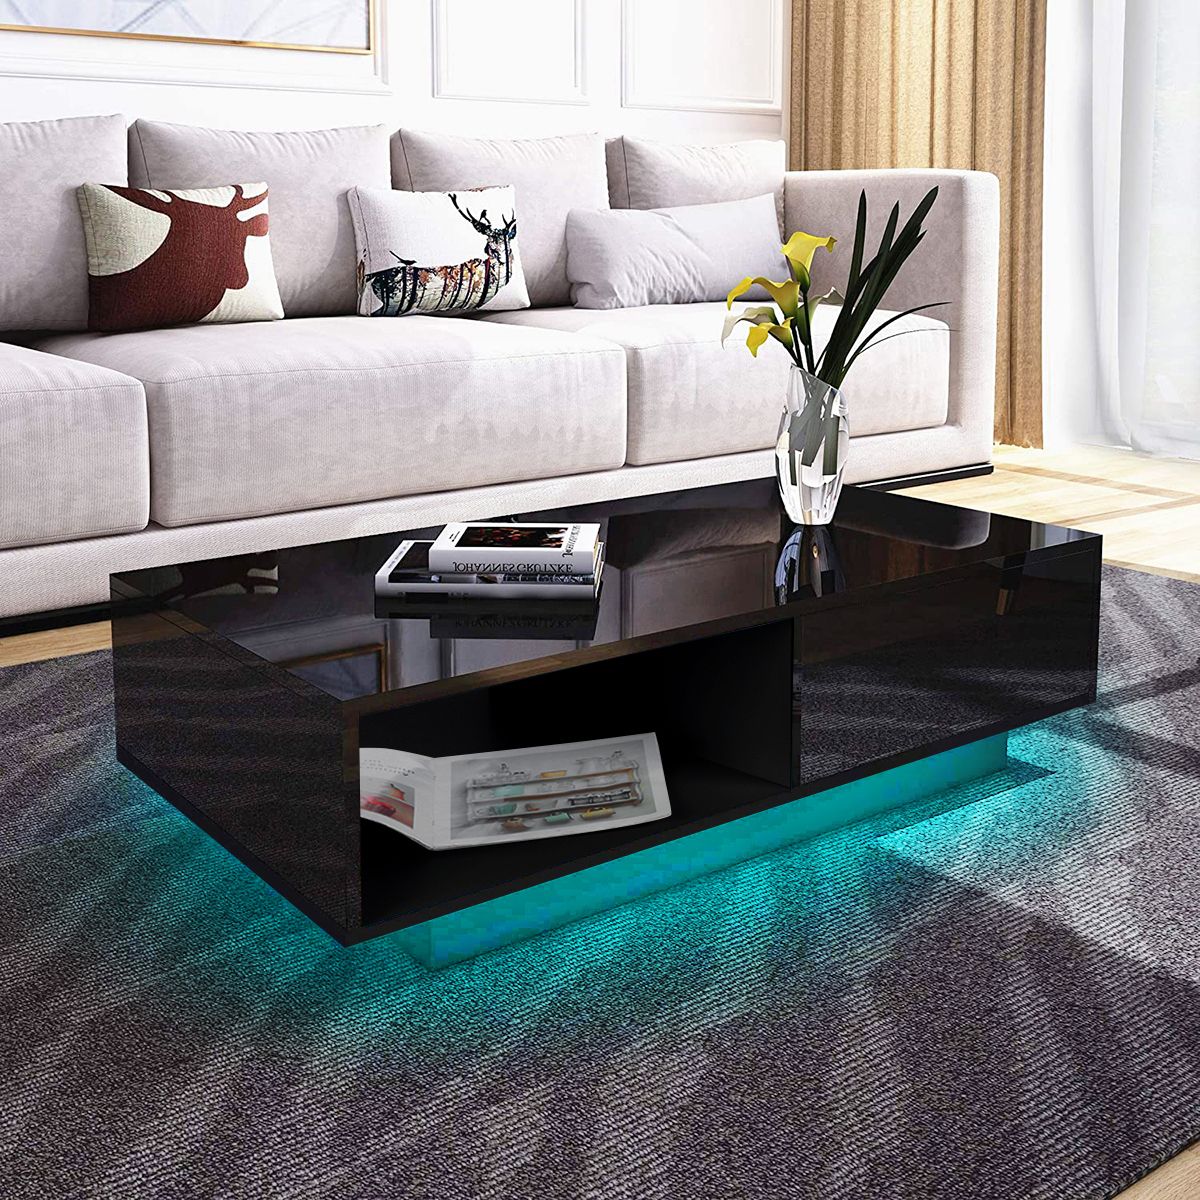 Hommpa High Gloss Led Coffee Table W/ 4 Drawers Living Room With Remote In Led Coffee Tables With 4 Drawers (View 11 of 15)